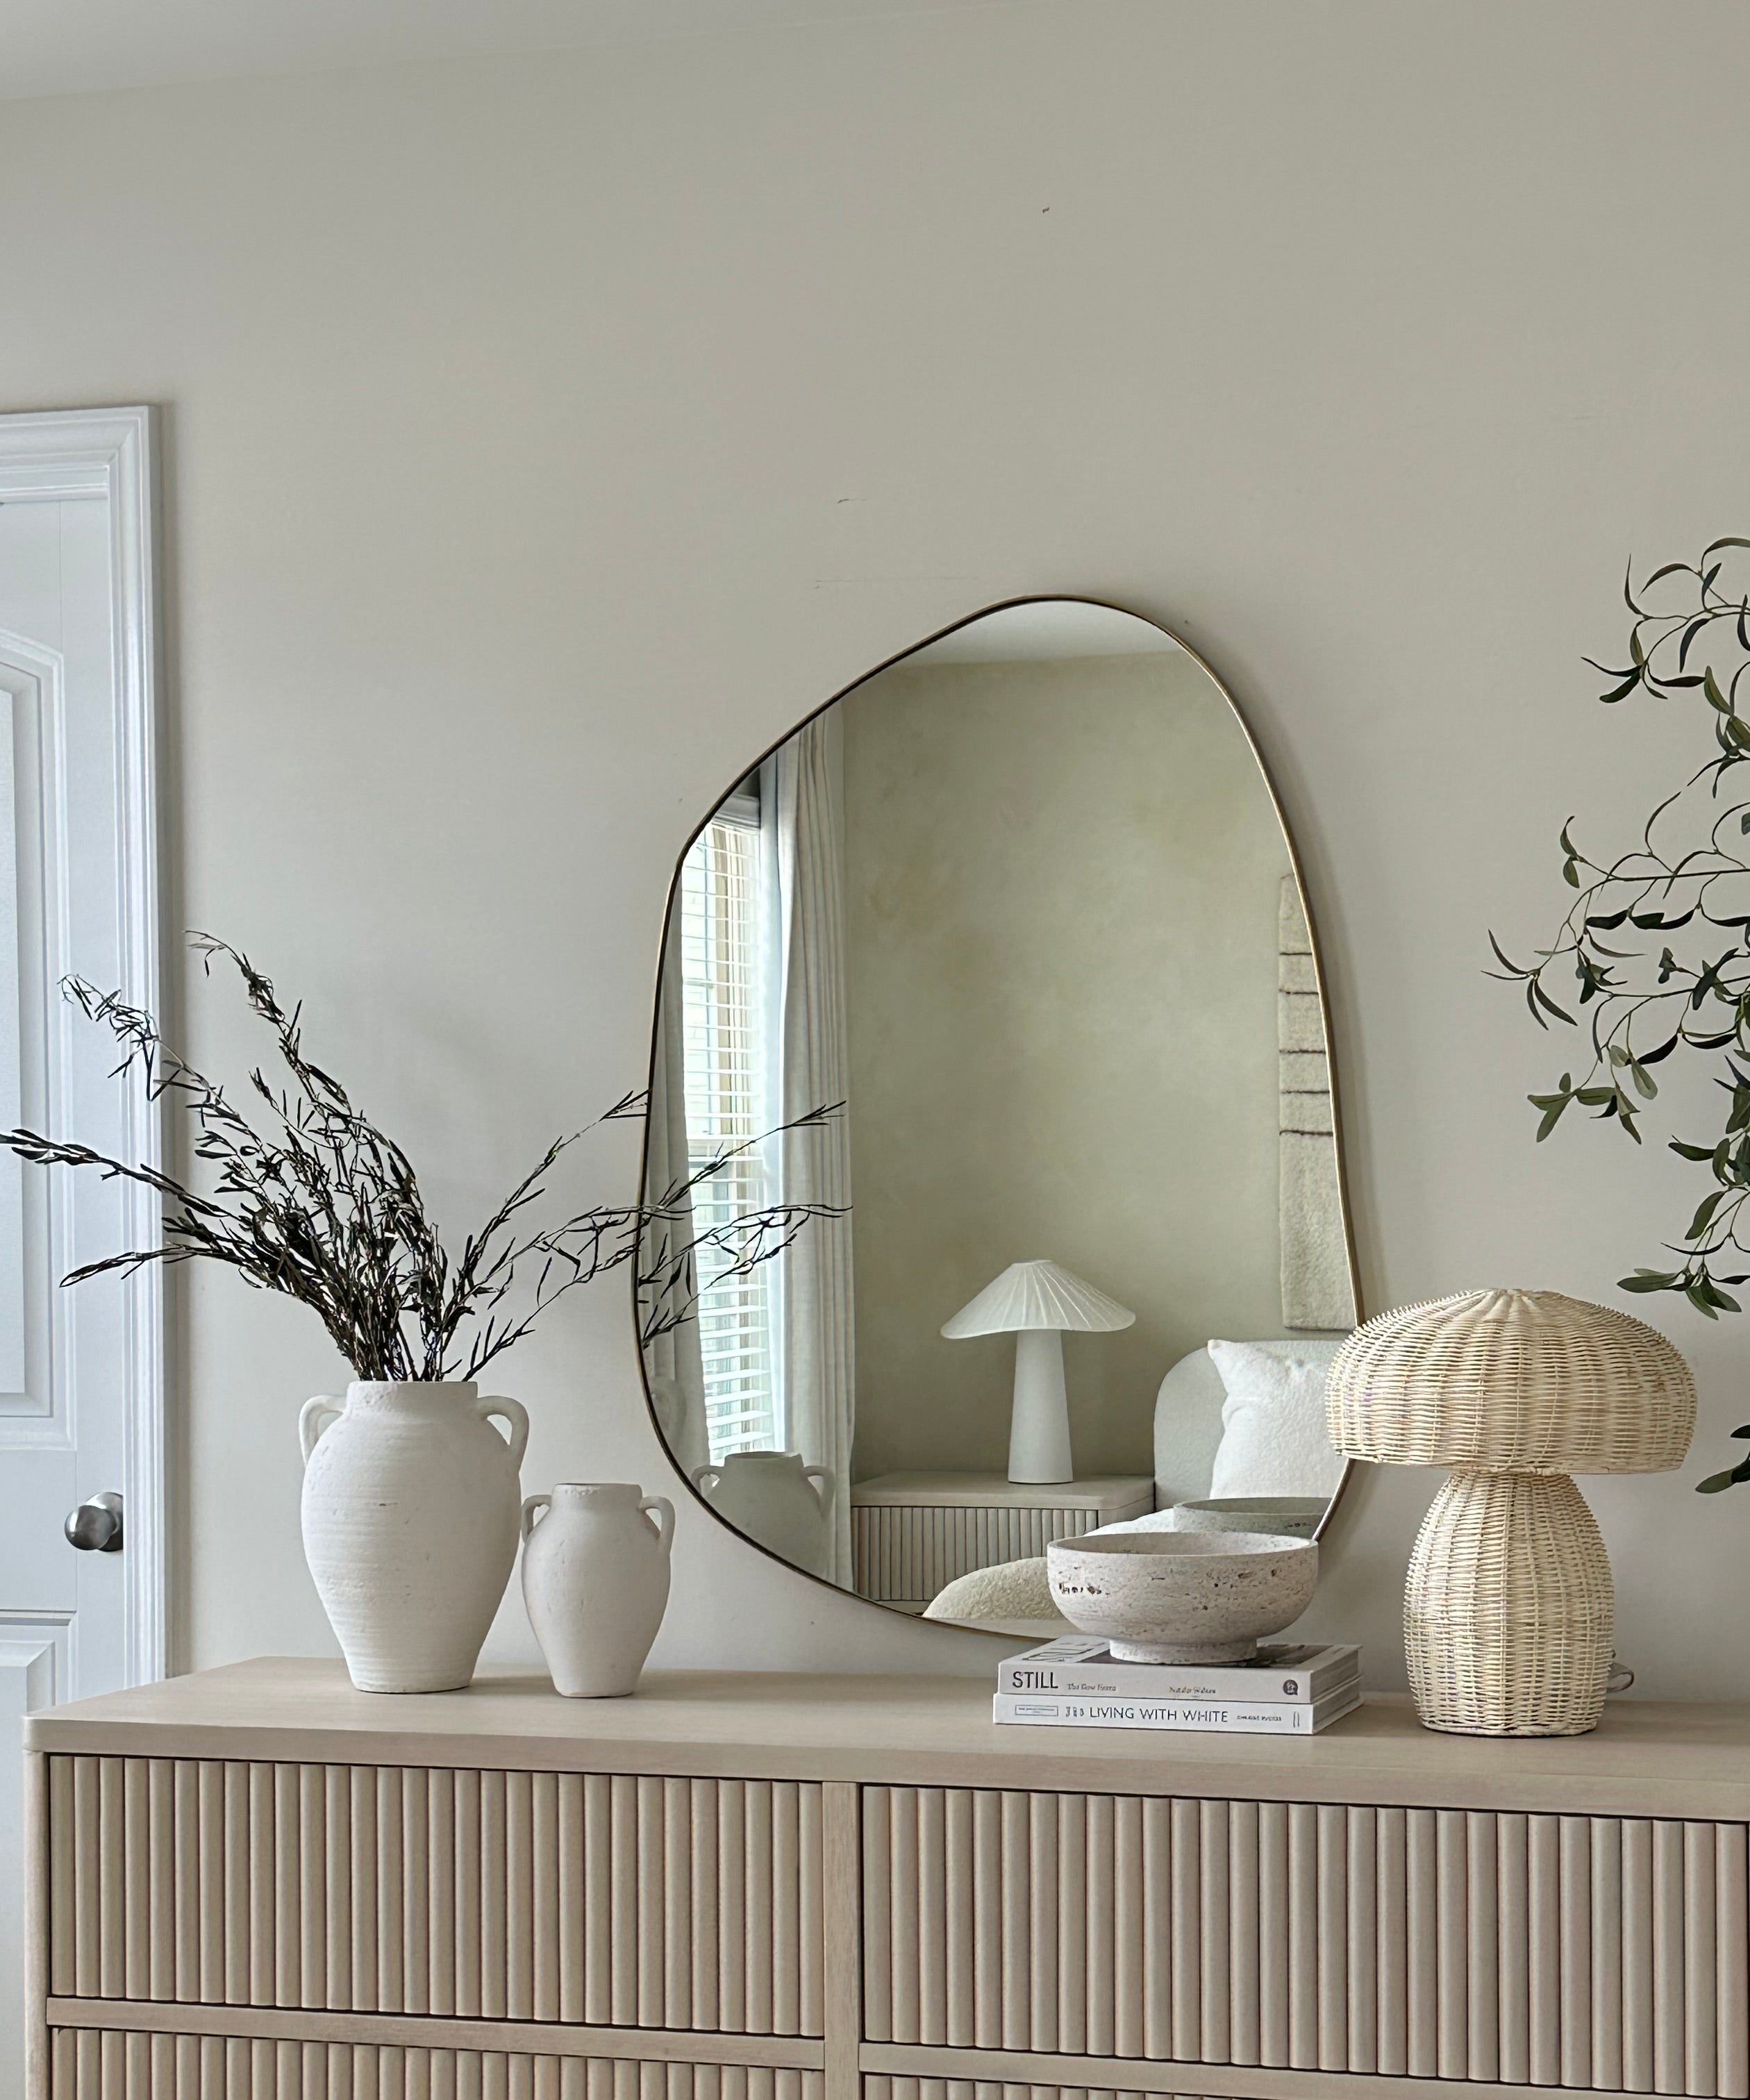 How to Clean and Maintain a Mirror: Best Way to Clean Mirrors